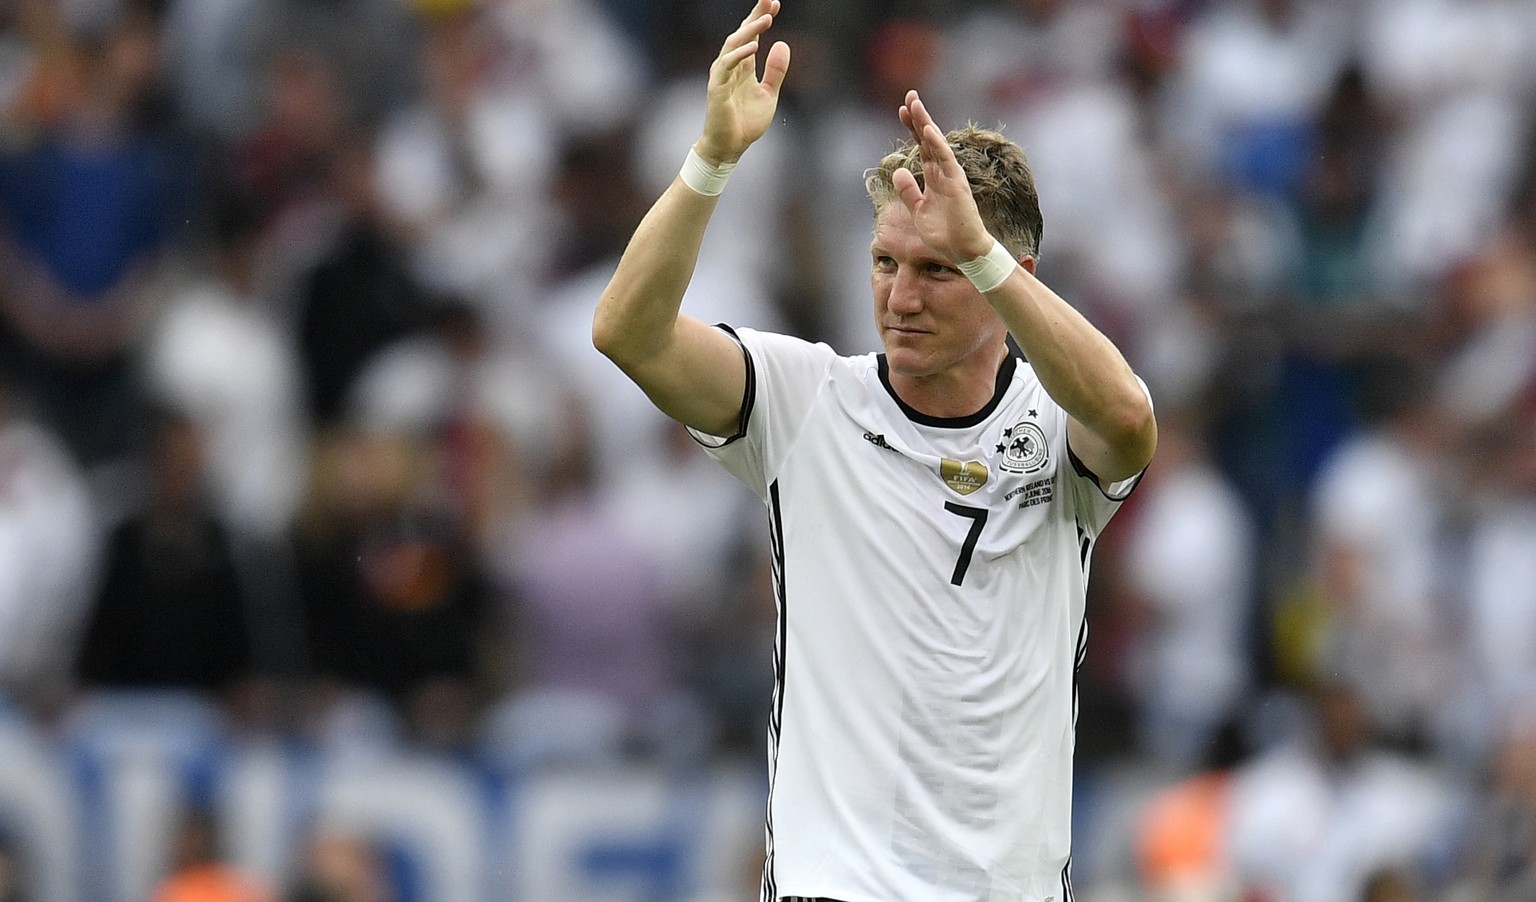 Germany's Bastian Schweinsteiger gestures at the end of the Euro 2016 Group C soccer match between Northern Ireland and Germany at the Parc des Princes stadium in Paris, France, Tuesday, June 21, 2016 ...